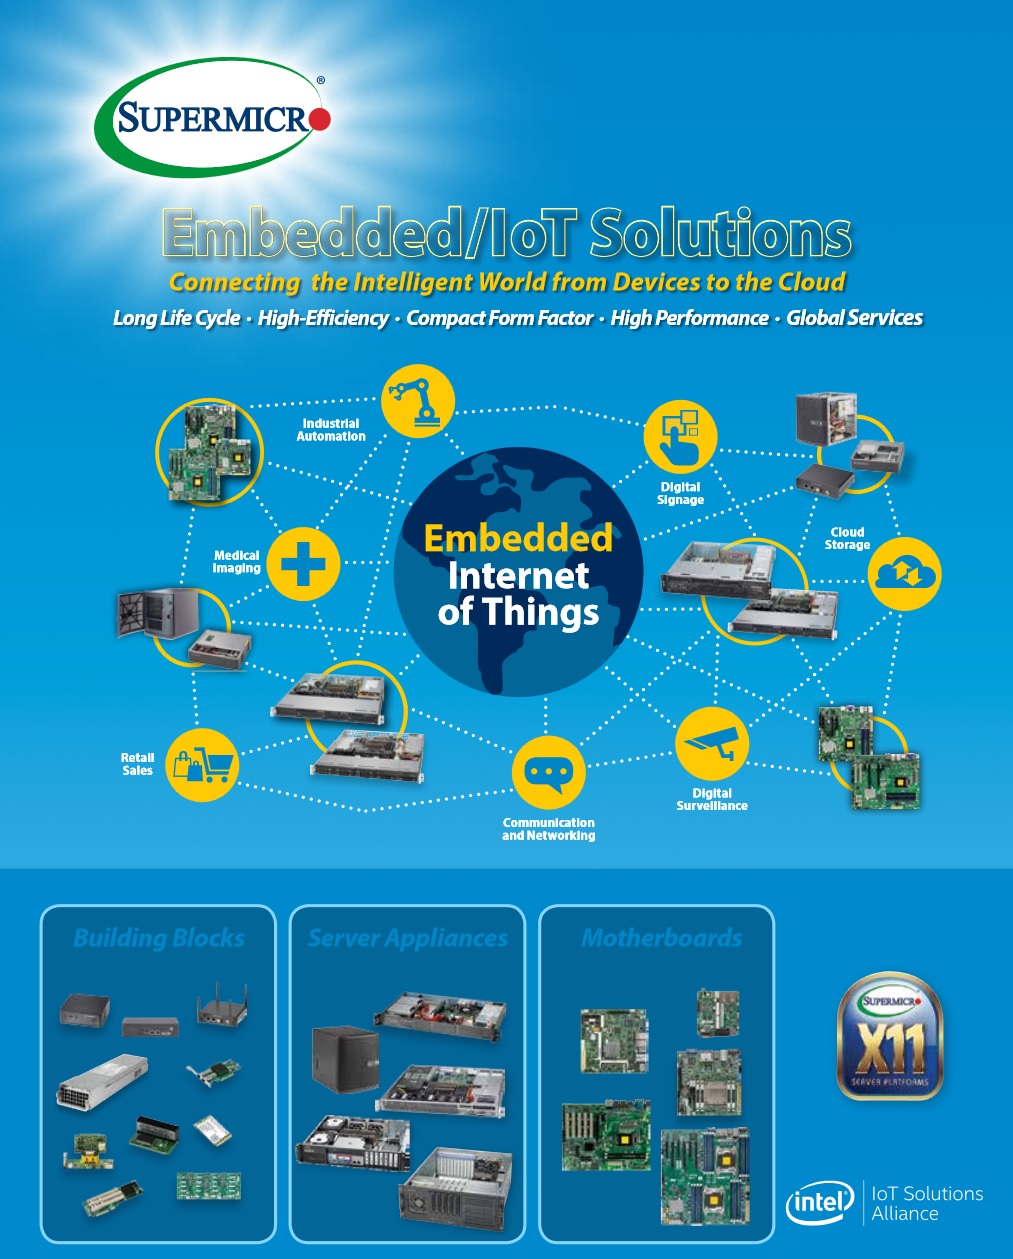 Supermicro embedded & IoT